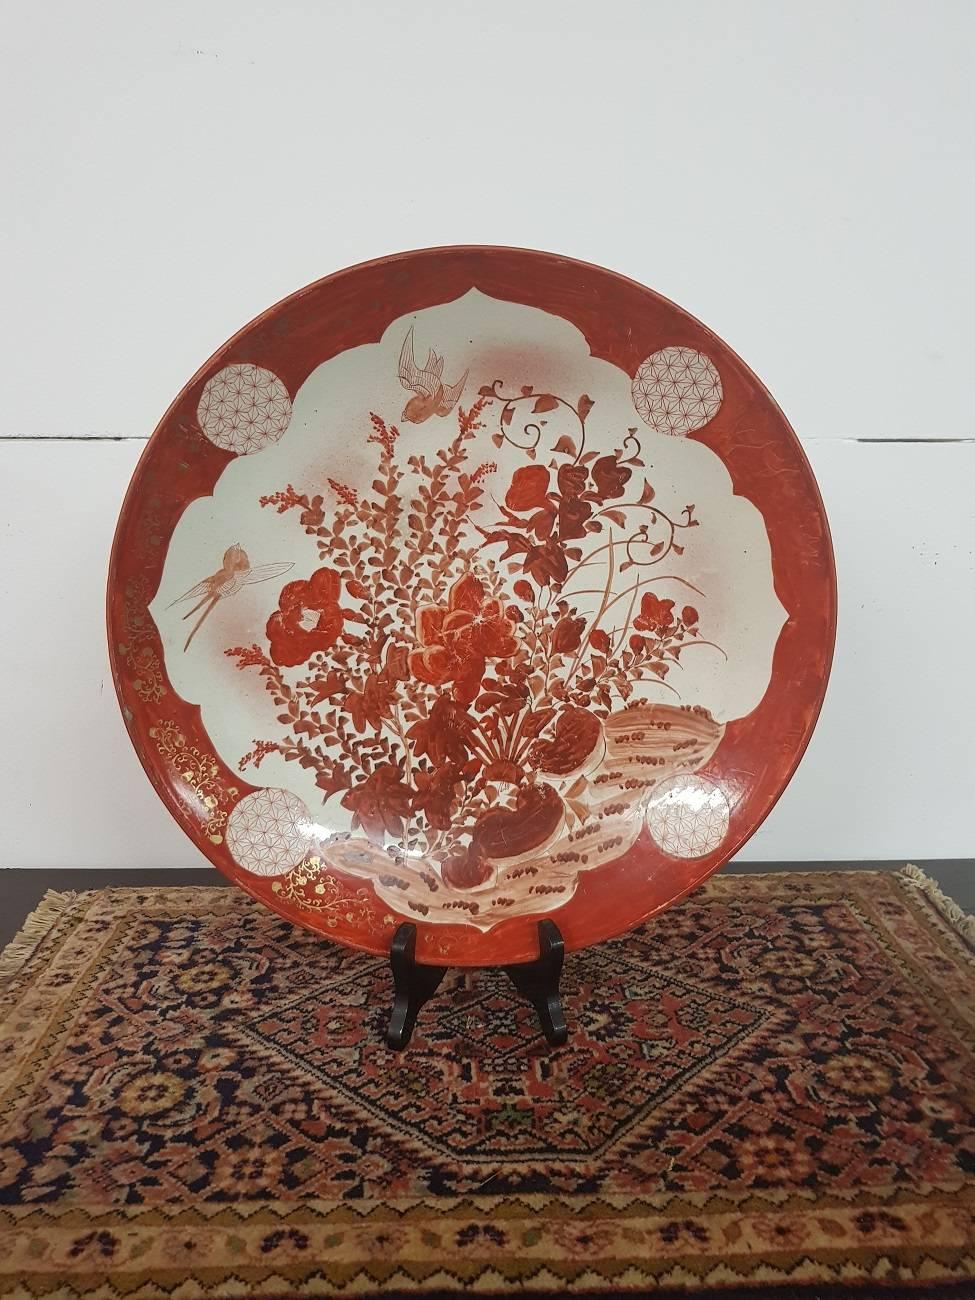 Large size Japanese Kutani marked porcelain plate from circa 1930 with a hand-painted decoration of birds and flowers (in mint condition only slight wear on the paint).

The measurements are:
Depth 37 cm/ 14.5 inch.
Width 37 cm/ 14.5